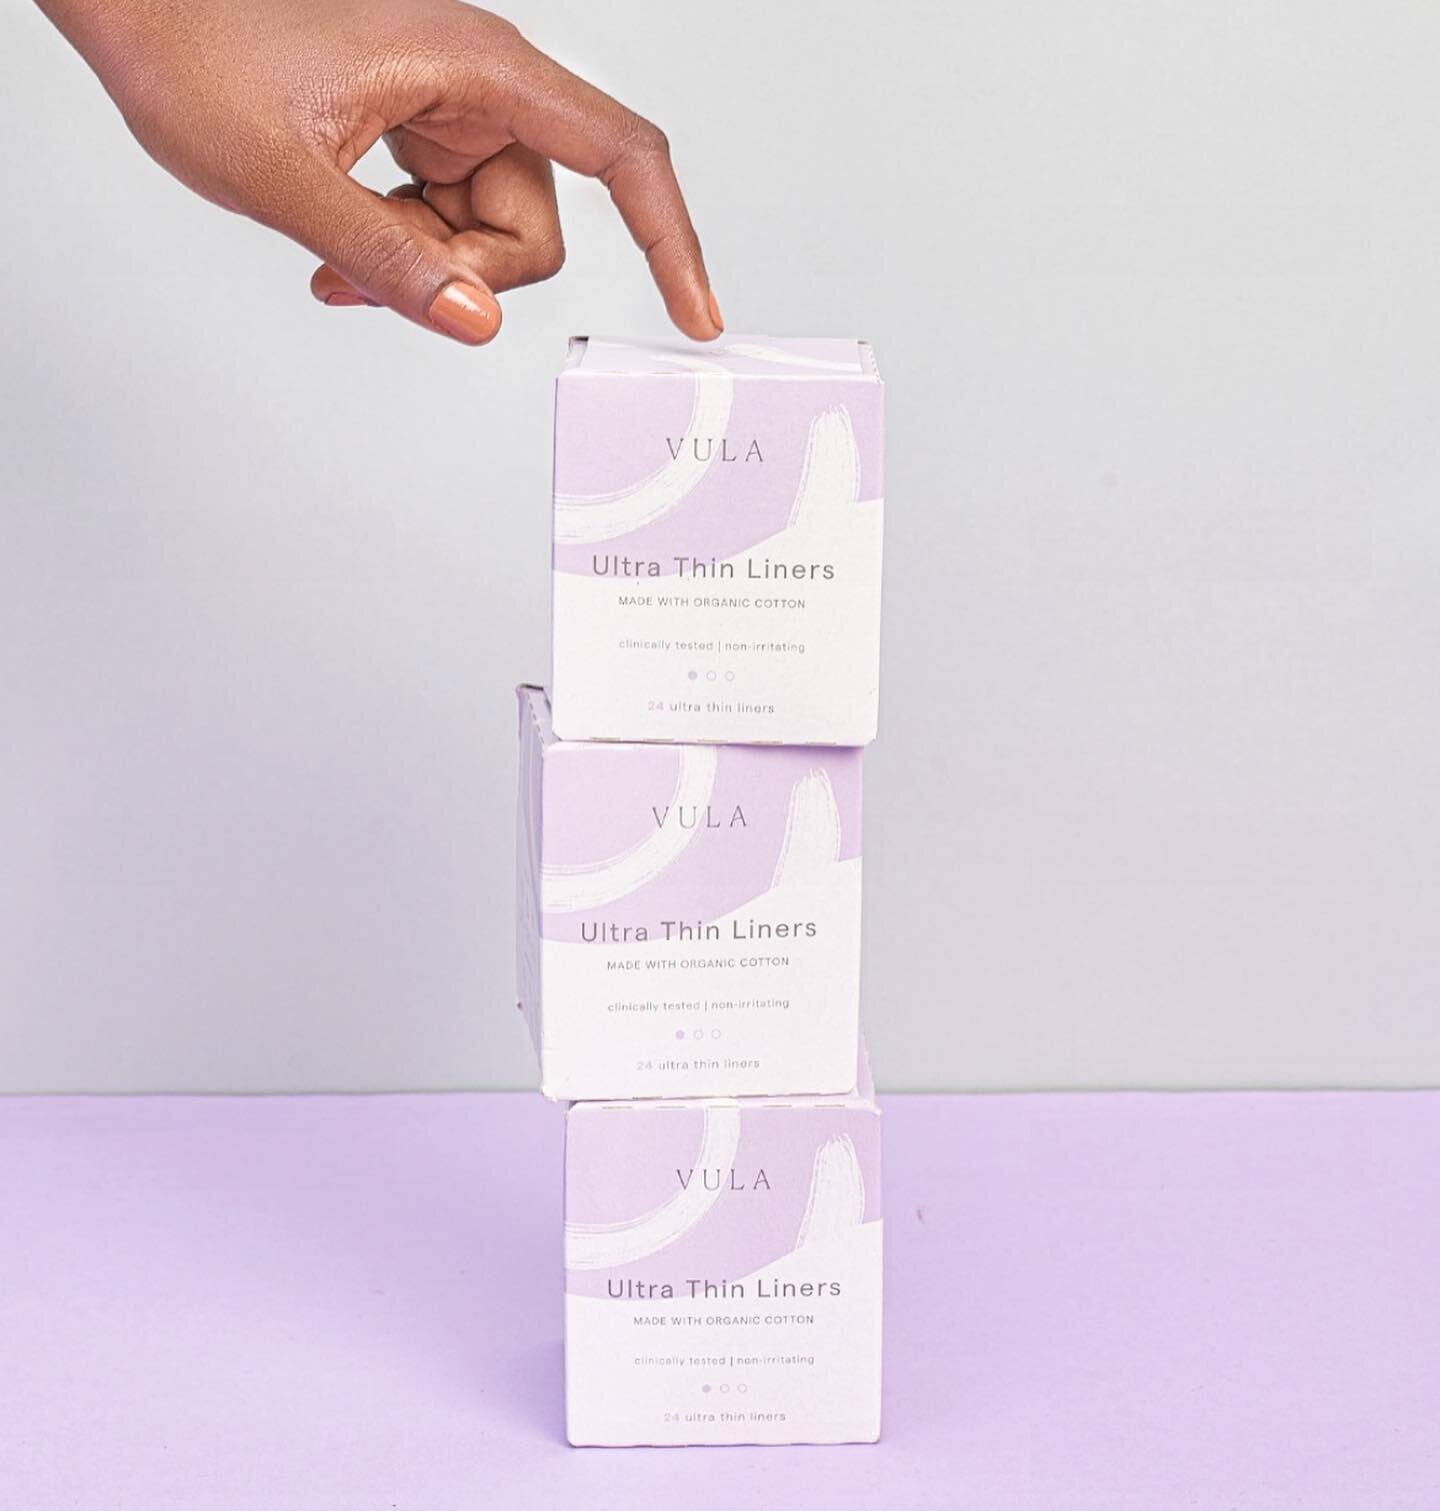 SOULD SPOTLIGHT: @shopvula is a Black Woman Owned feminine care products which include organic pads and panty liners At Vula, they believe that every woman deserves access to healthy feminine care products. Their goal is to listen and serve women of 